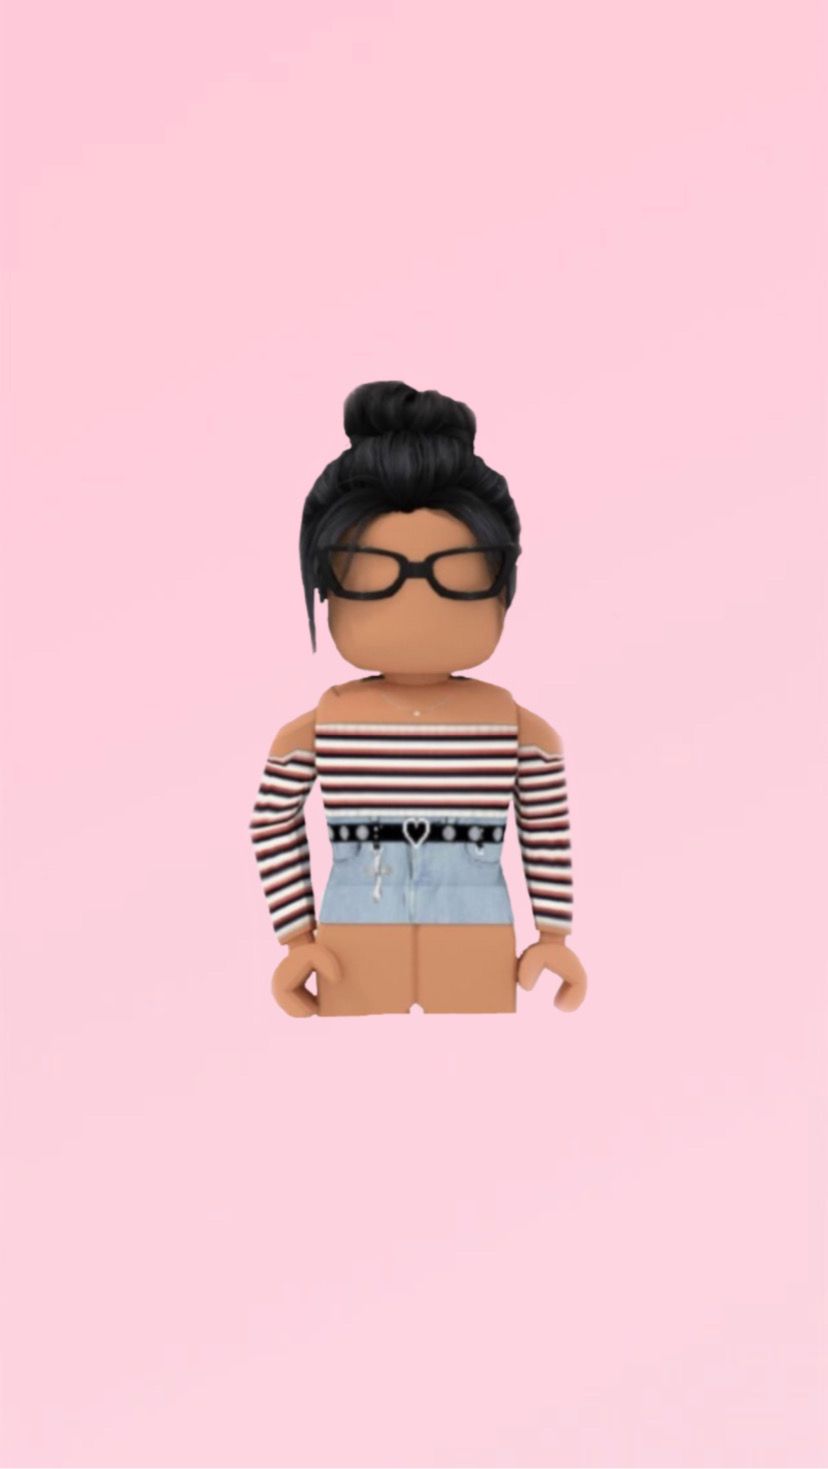 Roblox People Wallpapers Wallpaper Cave - roblox pictures images people